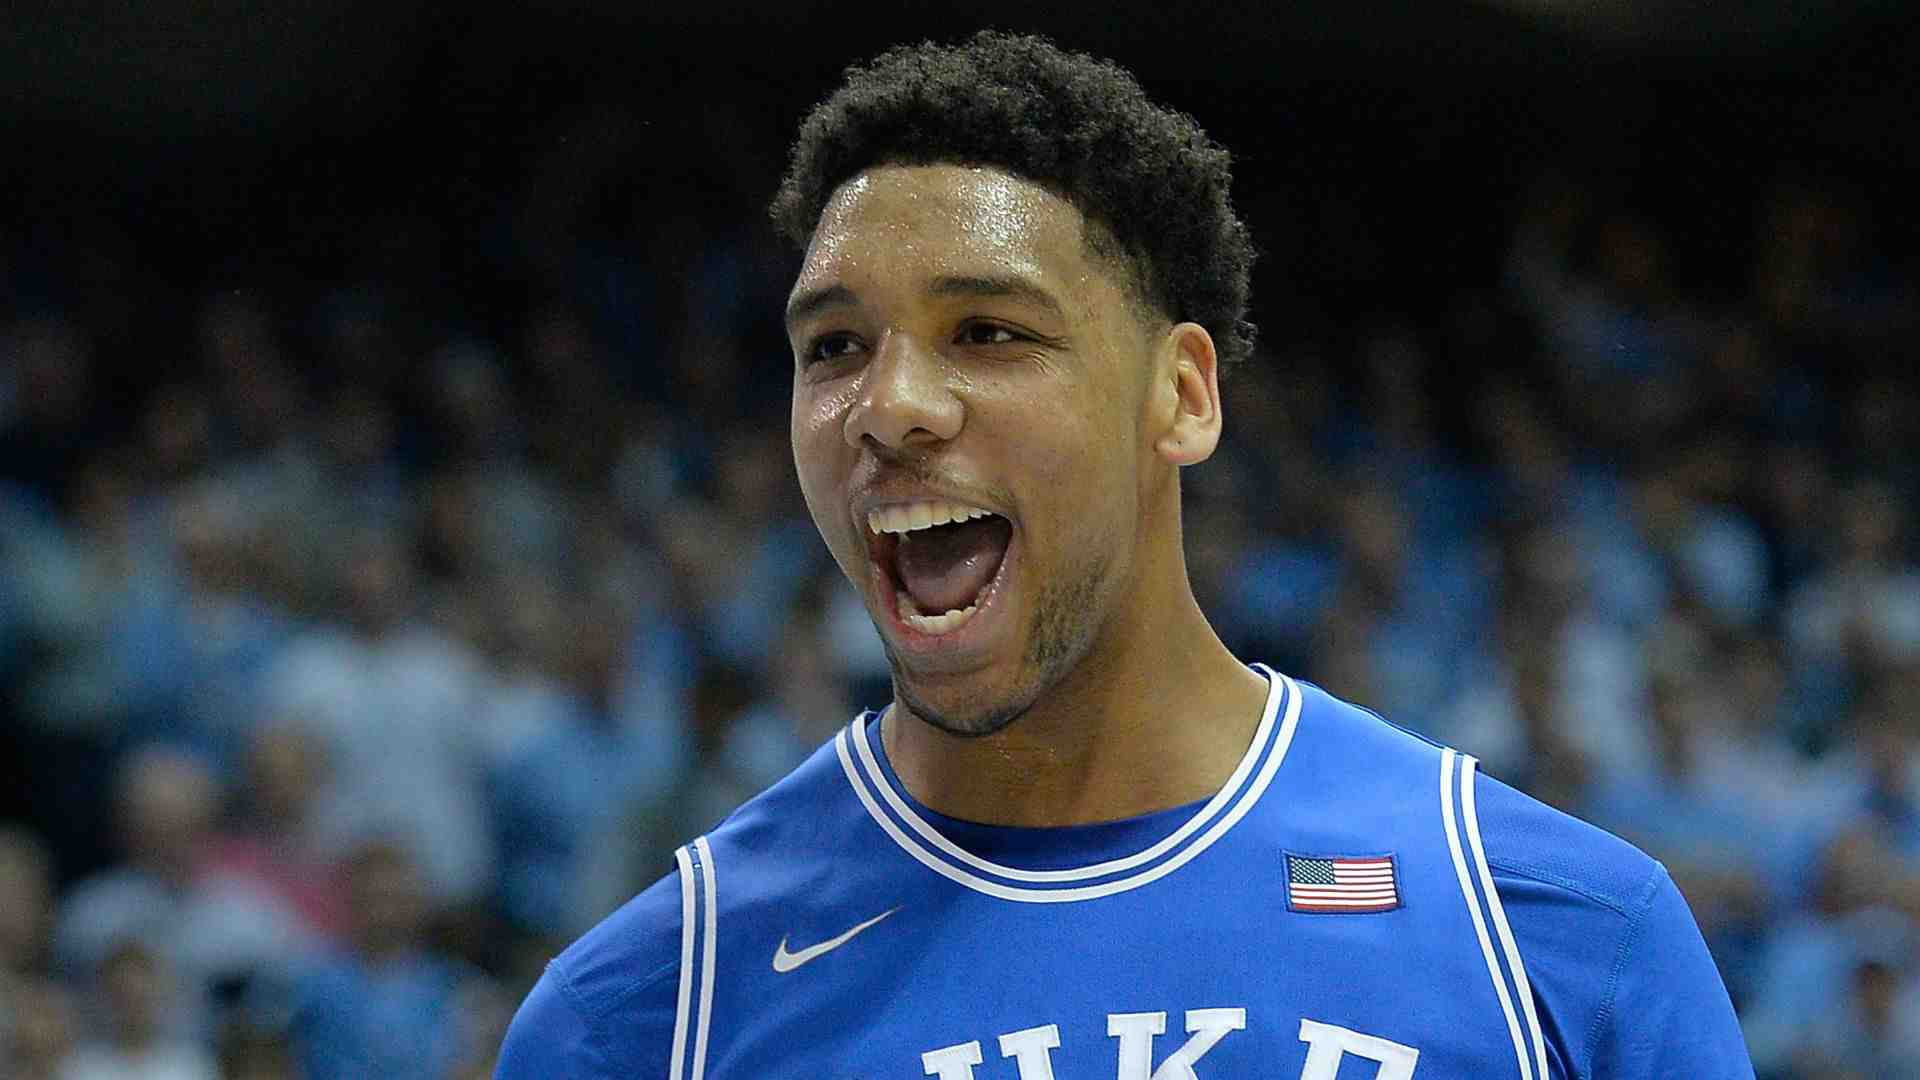 SIXER COACH BRETT BROWN OVER THE MOON ABOUT JAHLIL OKAFOR. Fast